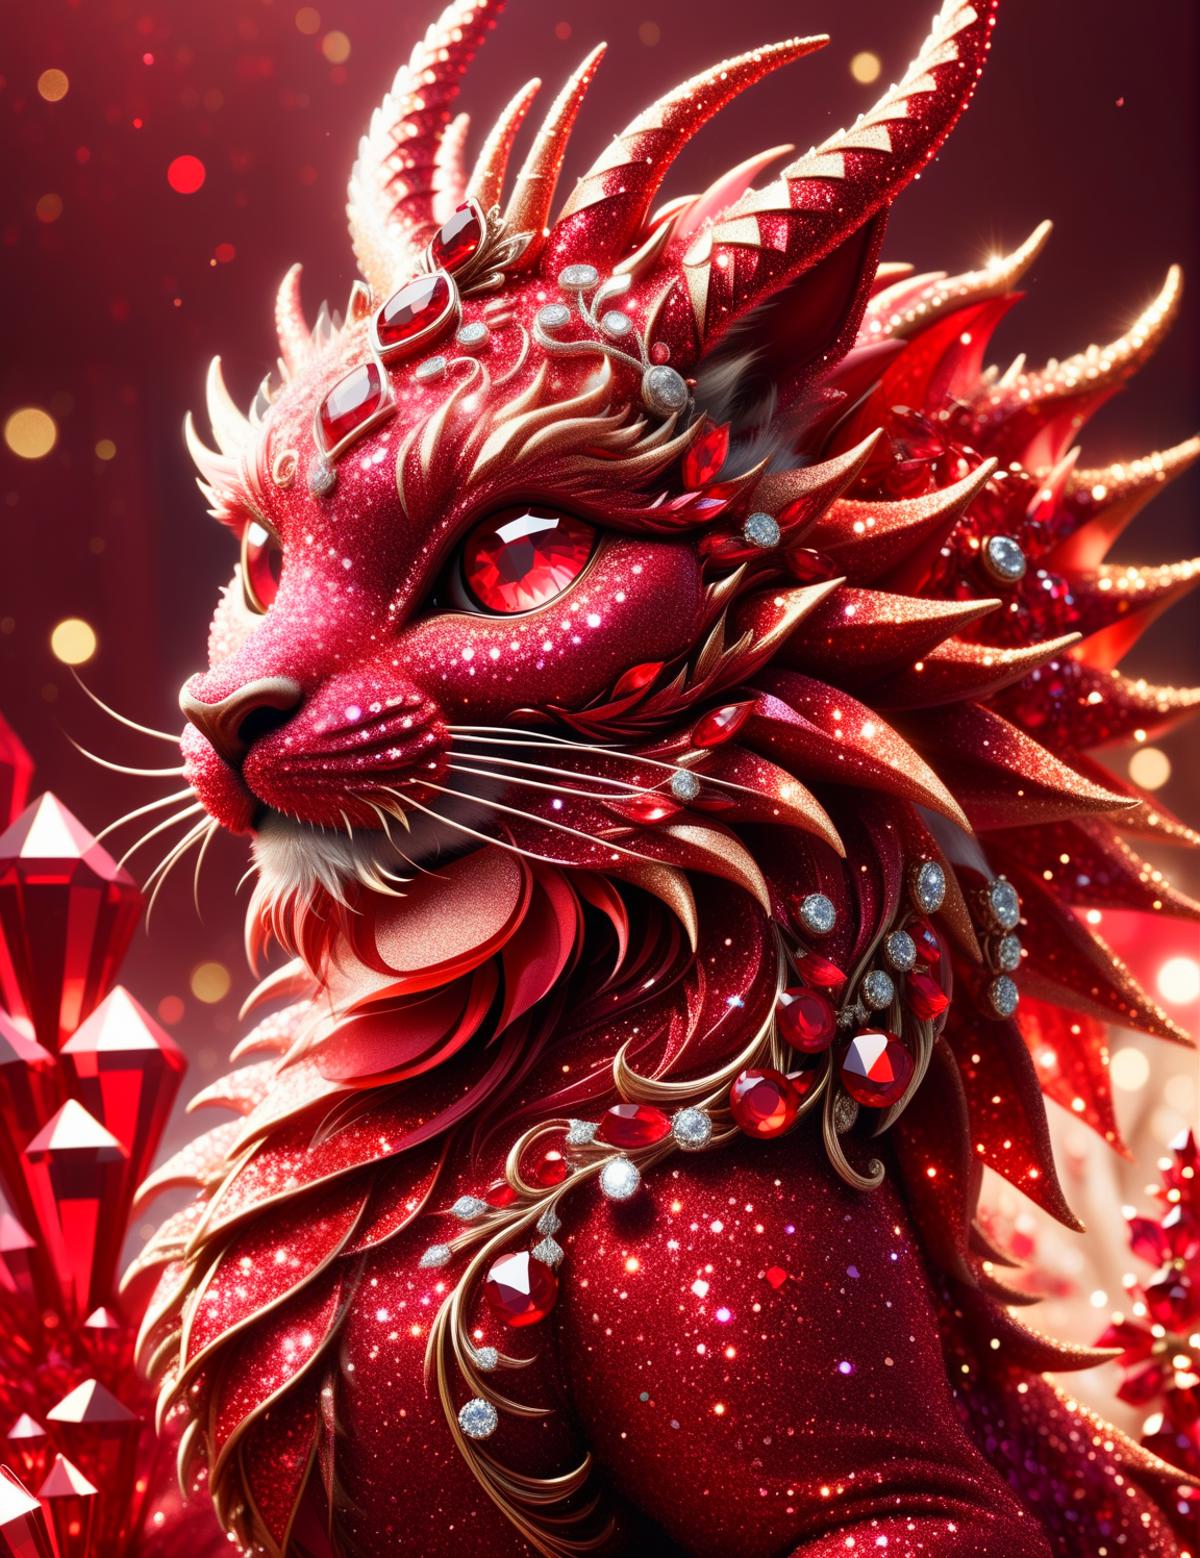 A red and gold cat with red eyes and a red mane, surrounded by red jewels.